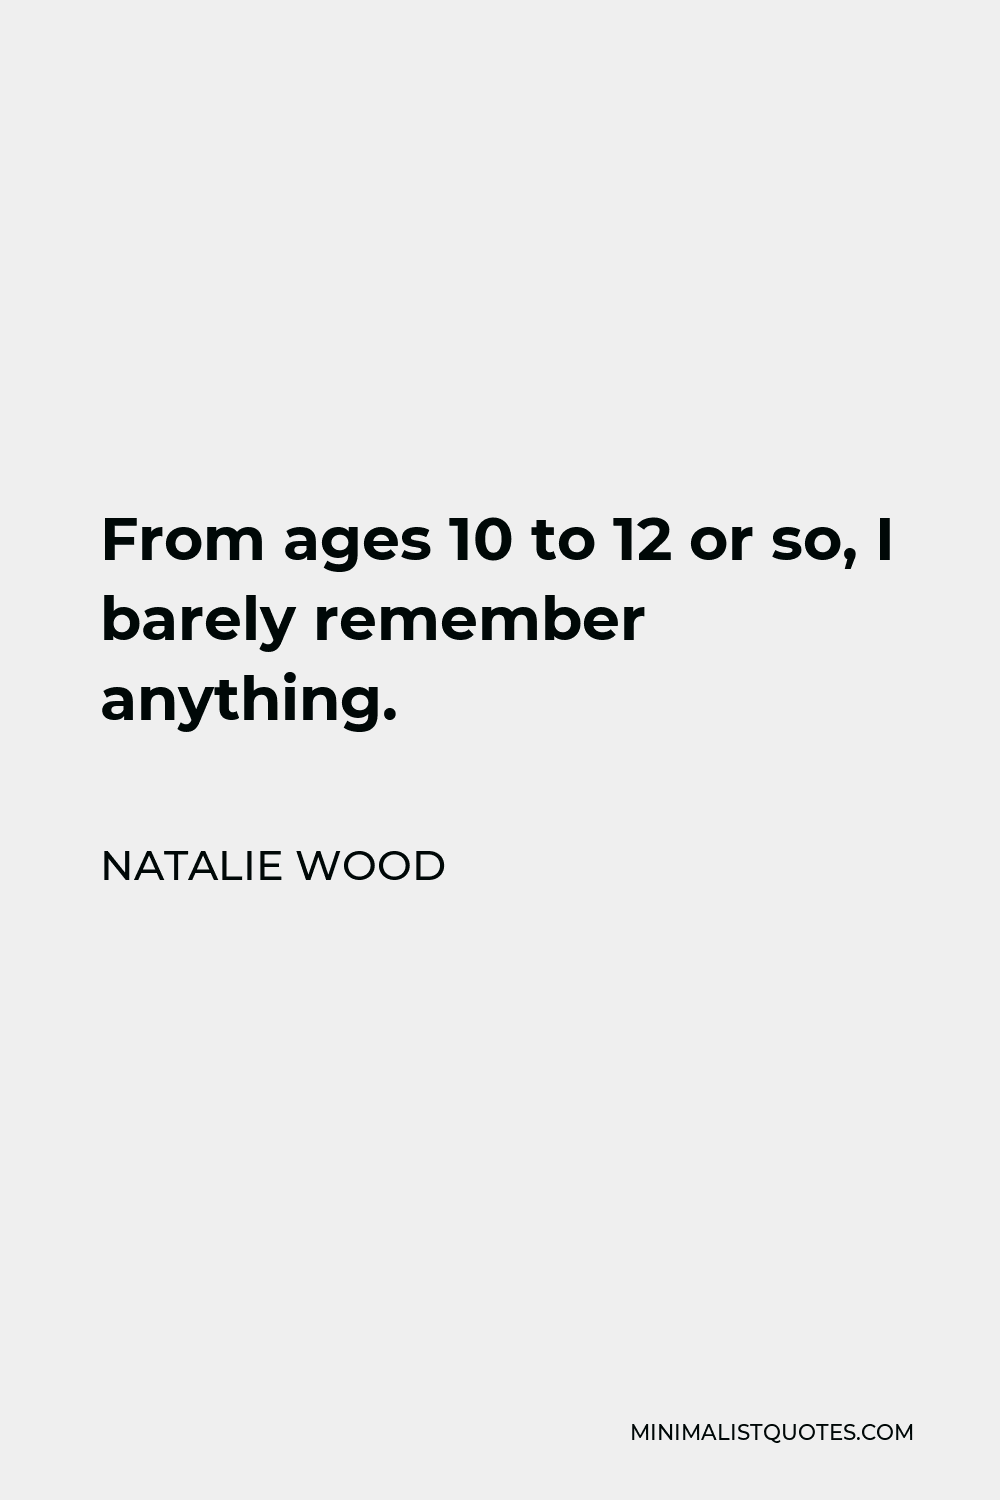 Natalie Wood Quote - From ages 10 to 12 or so, I barely remember anything.